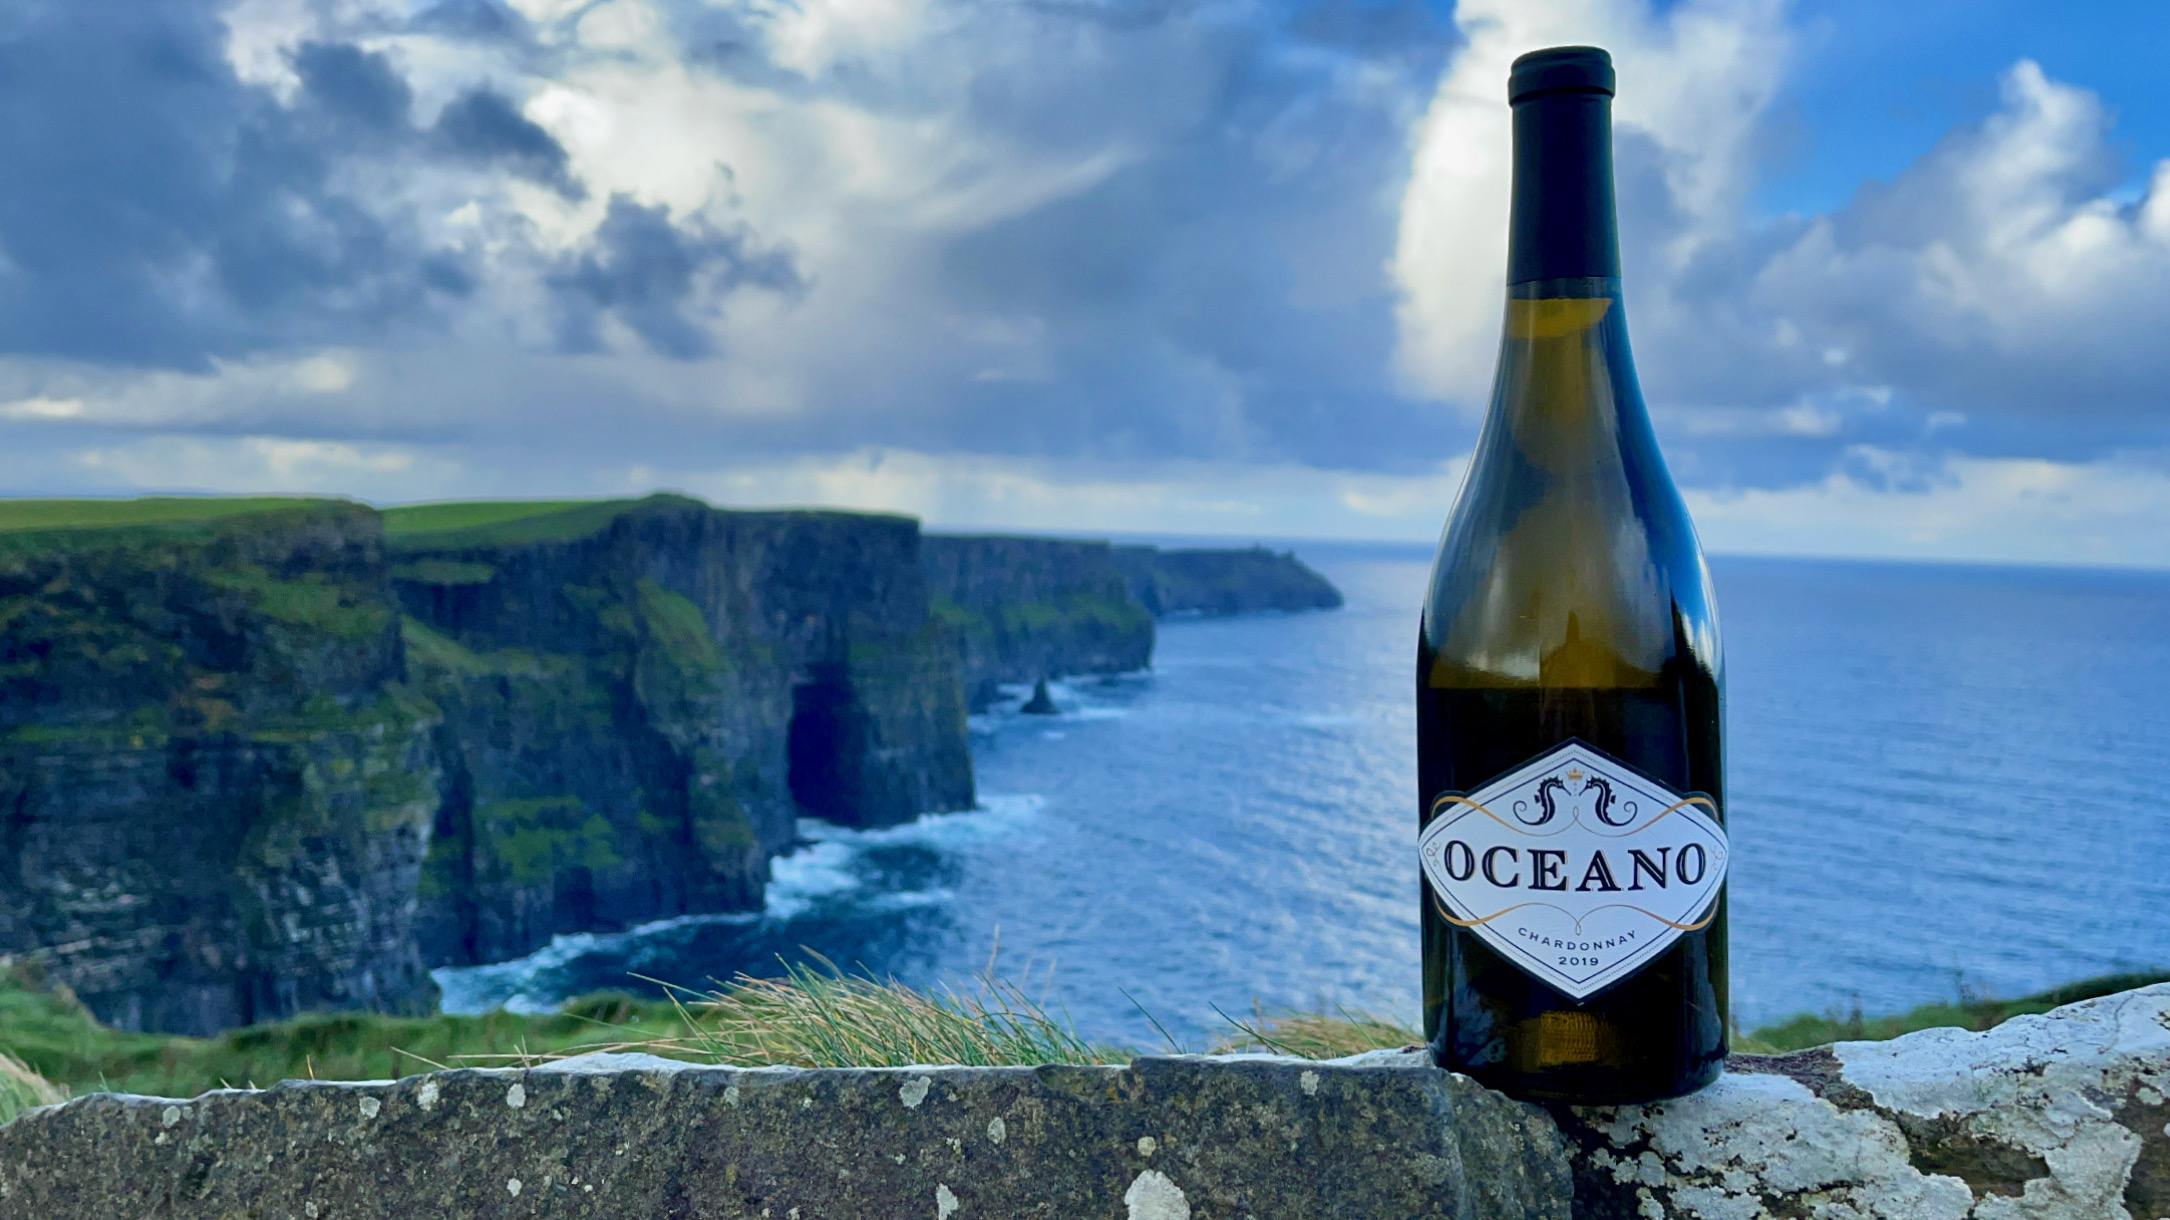 Oceano chardonnay placed on edge overlooking the Cliffs of Moor